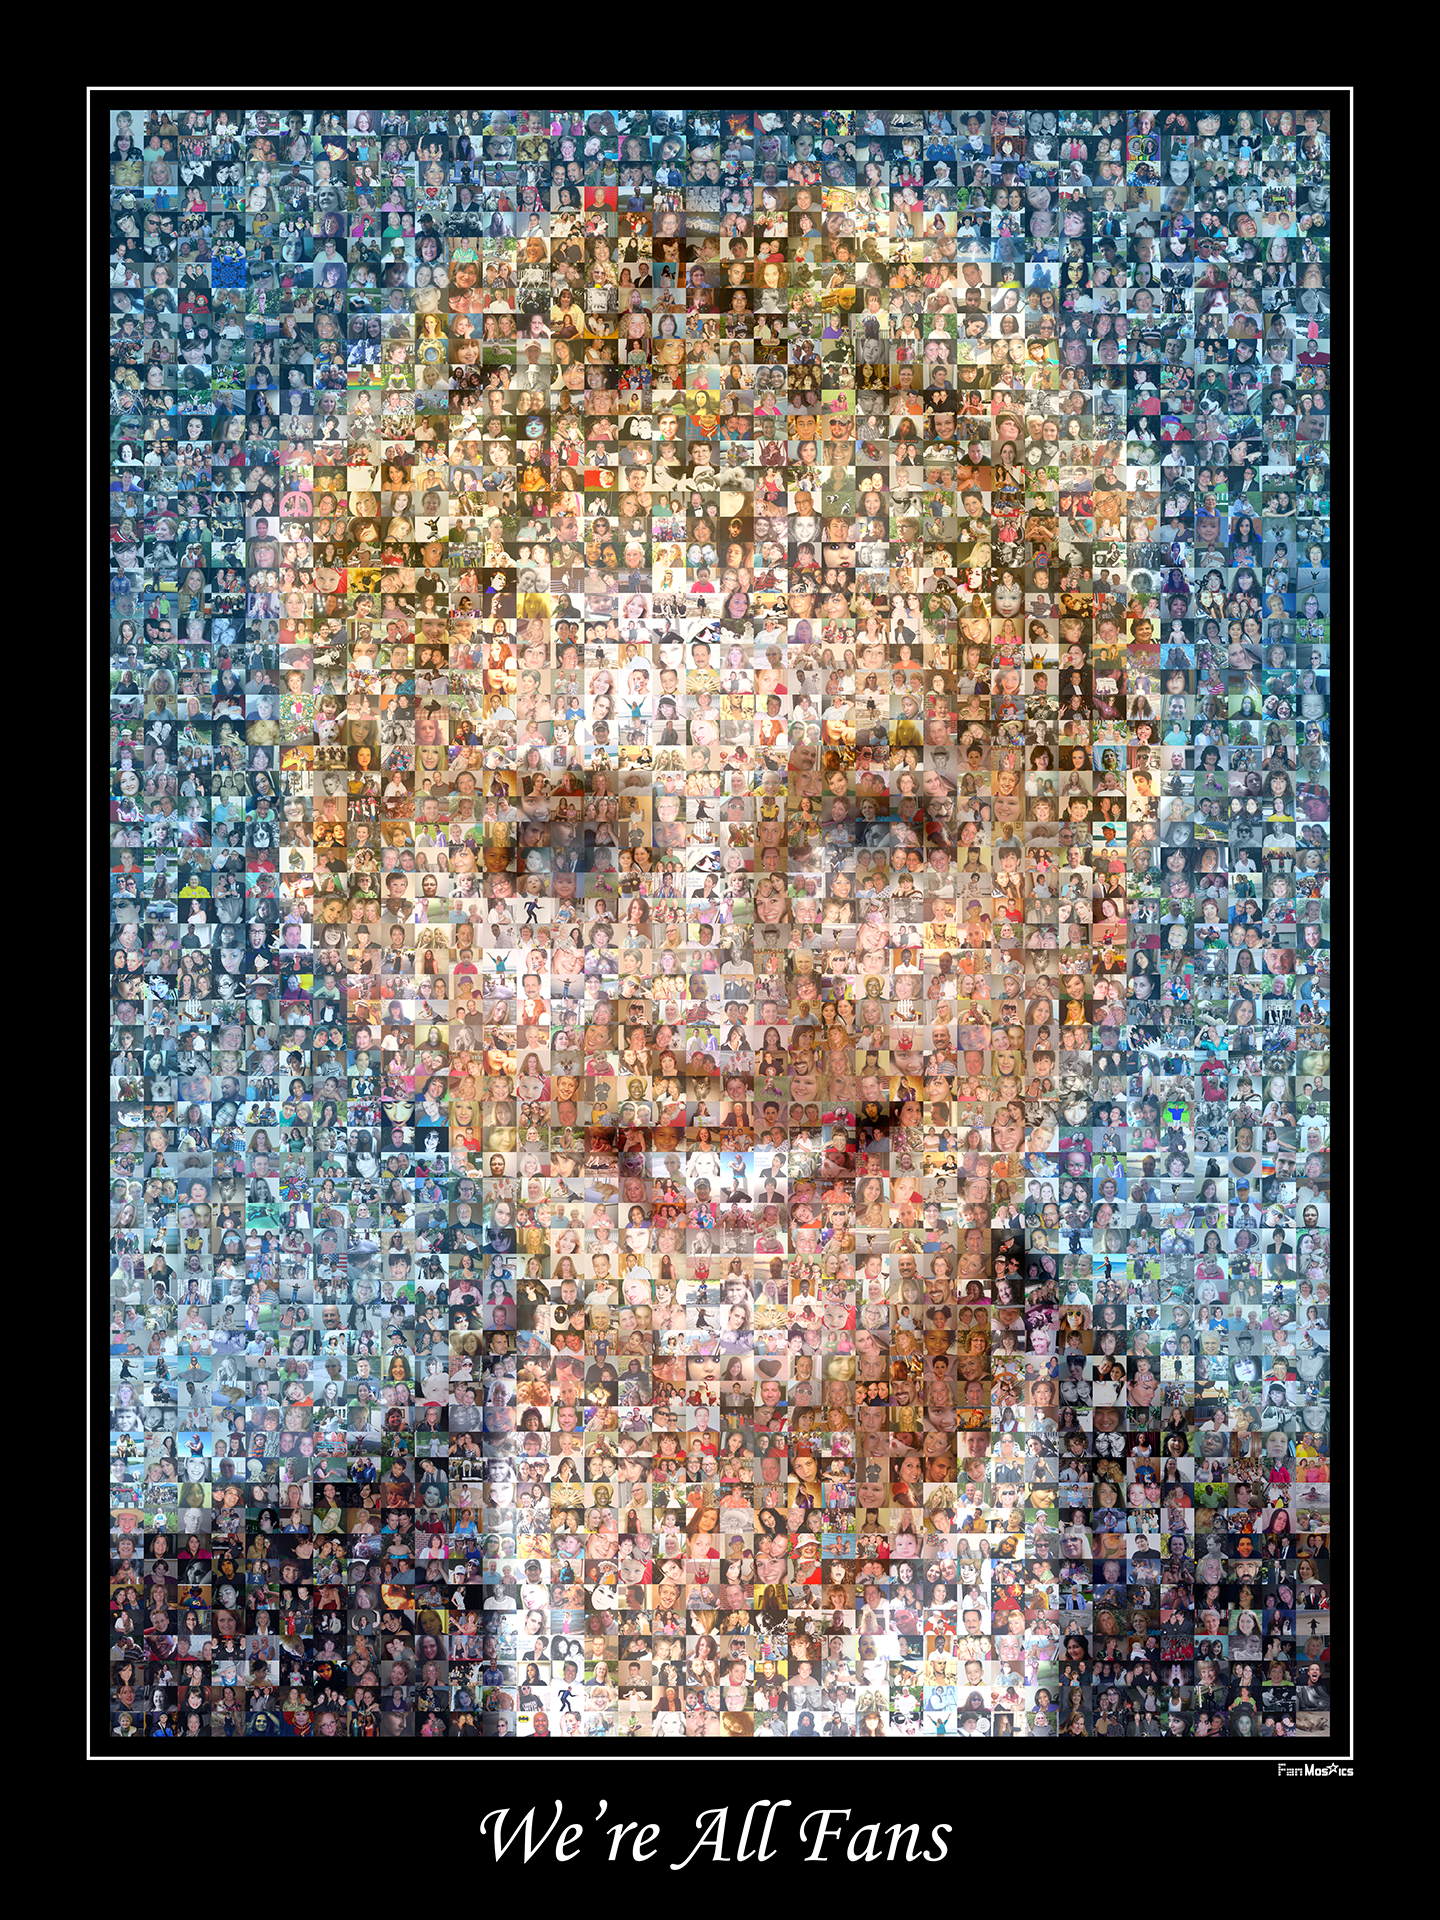 photo mosaic created using almost 2,000 fan photos